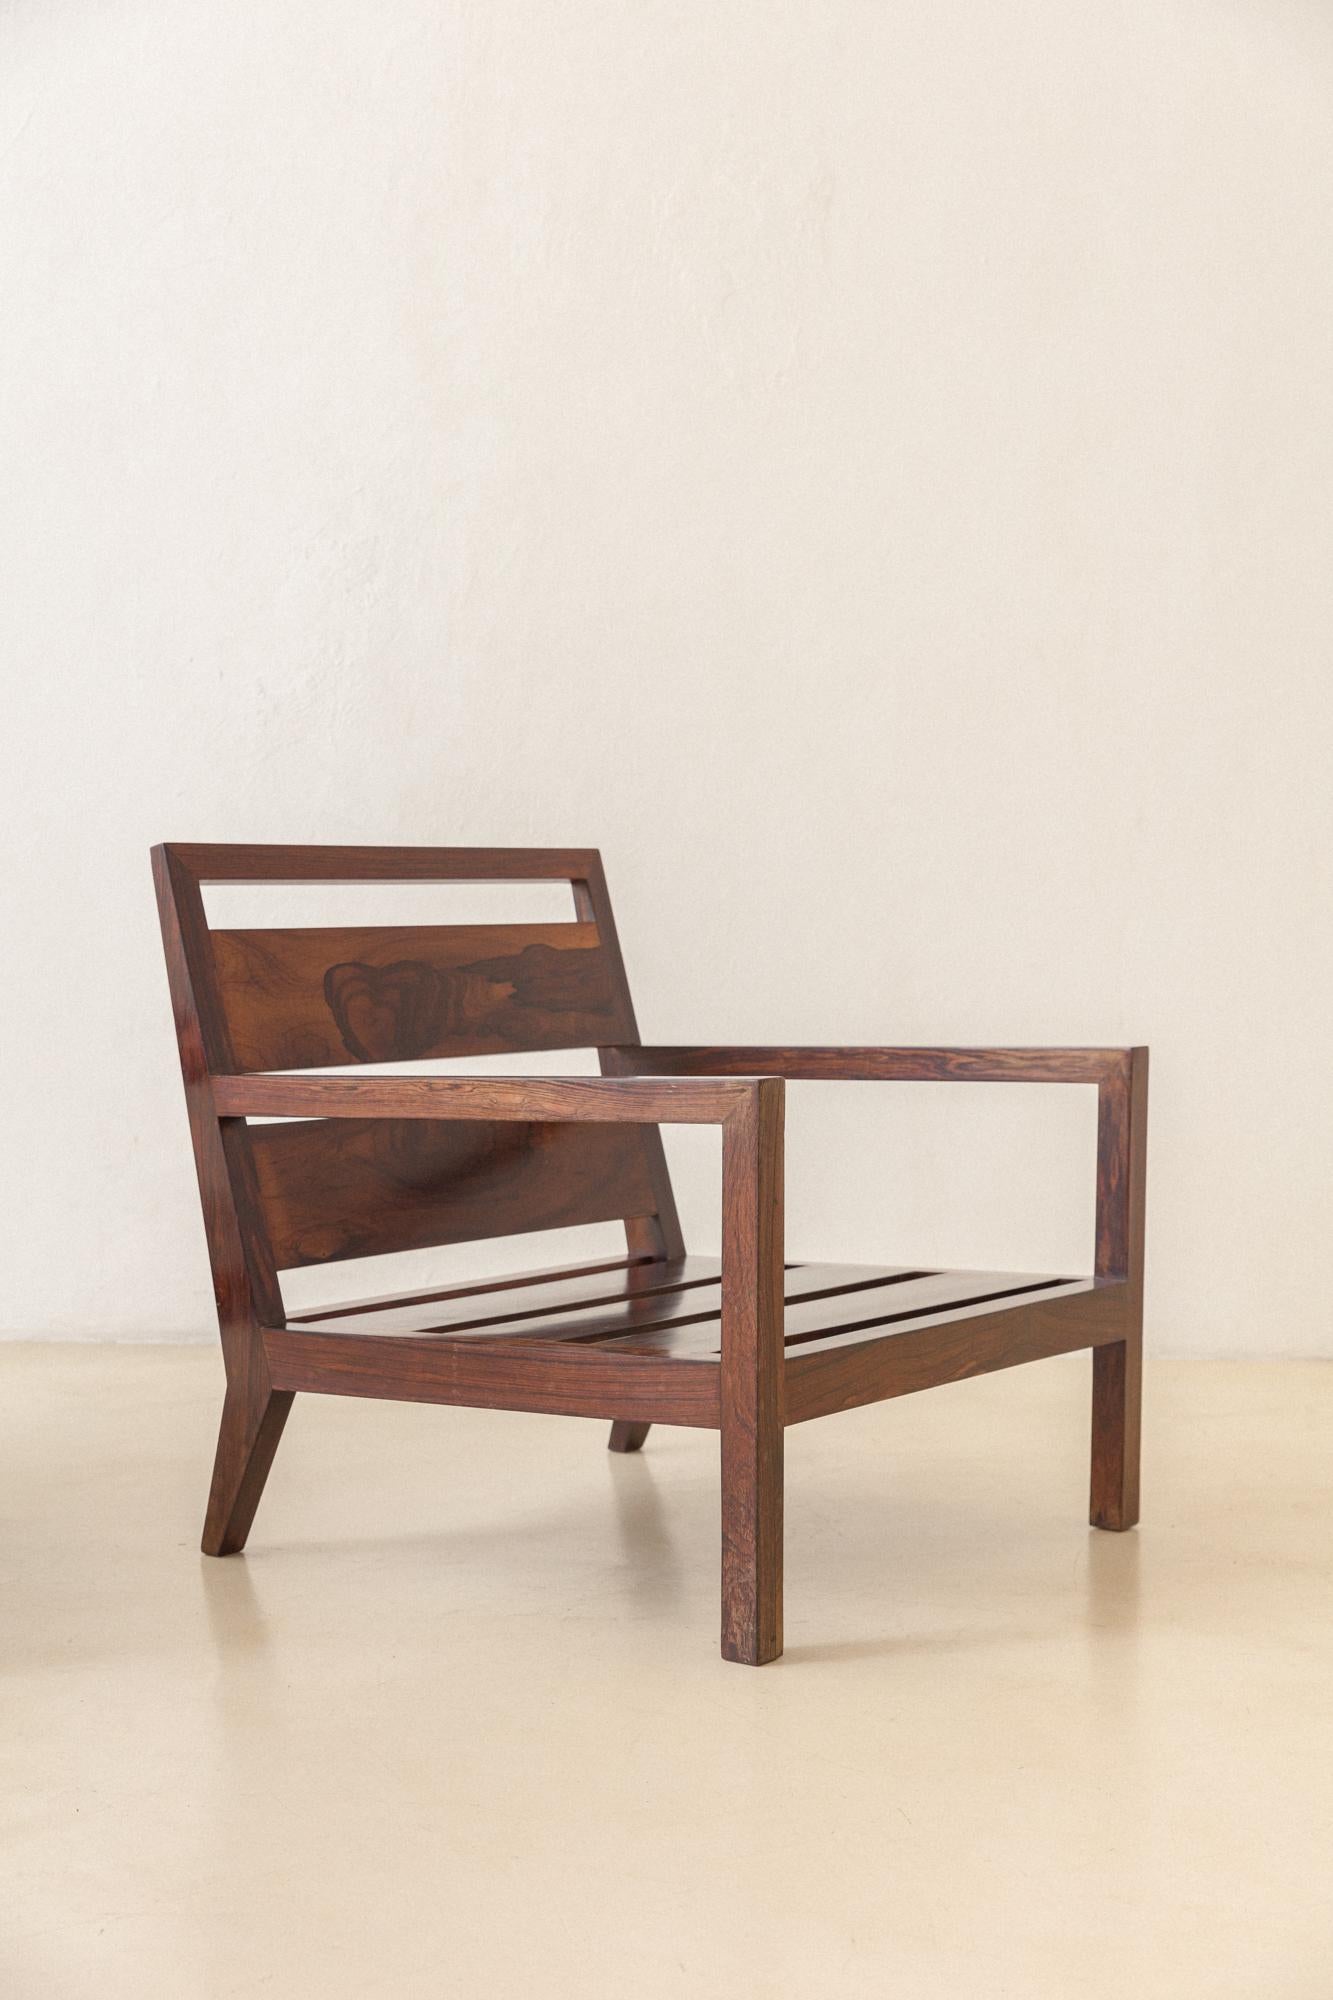 Pair of Brazilian Midcentury Armchairs, Unknown Designer, Solid Rosewood, 1960s For Sale 1